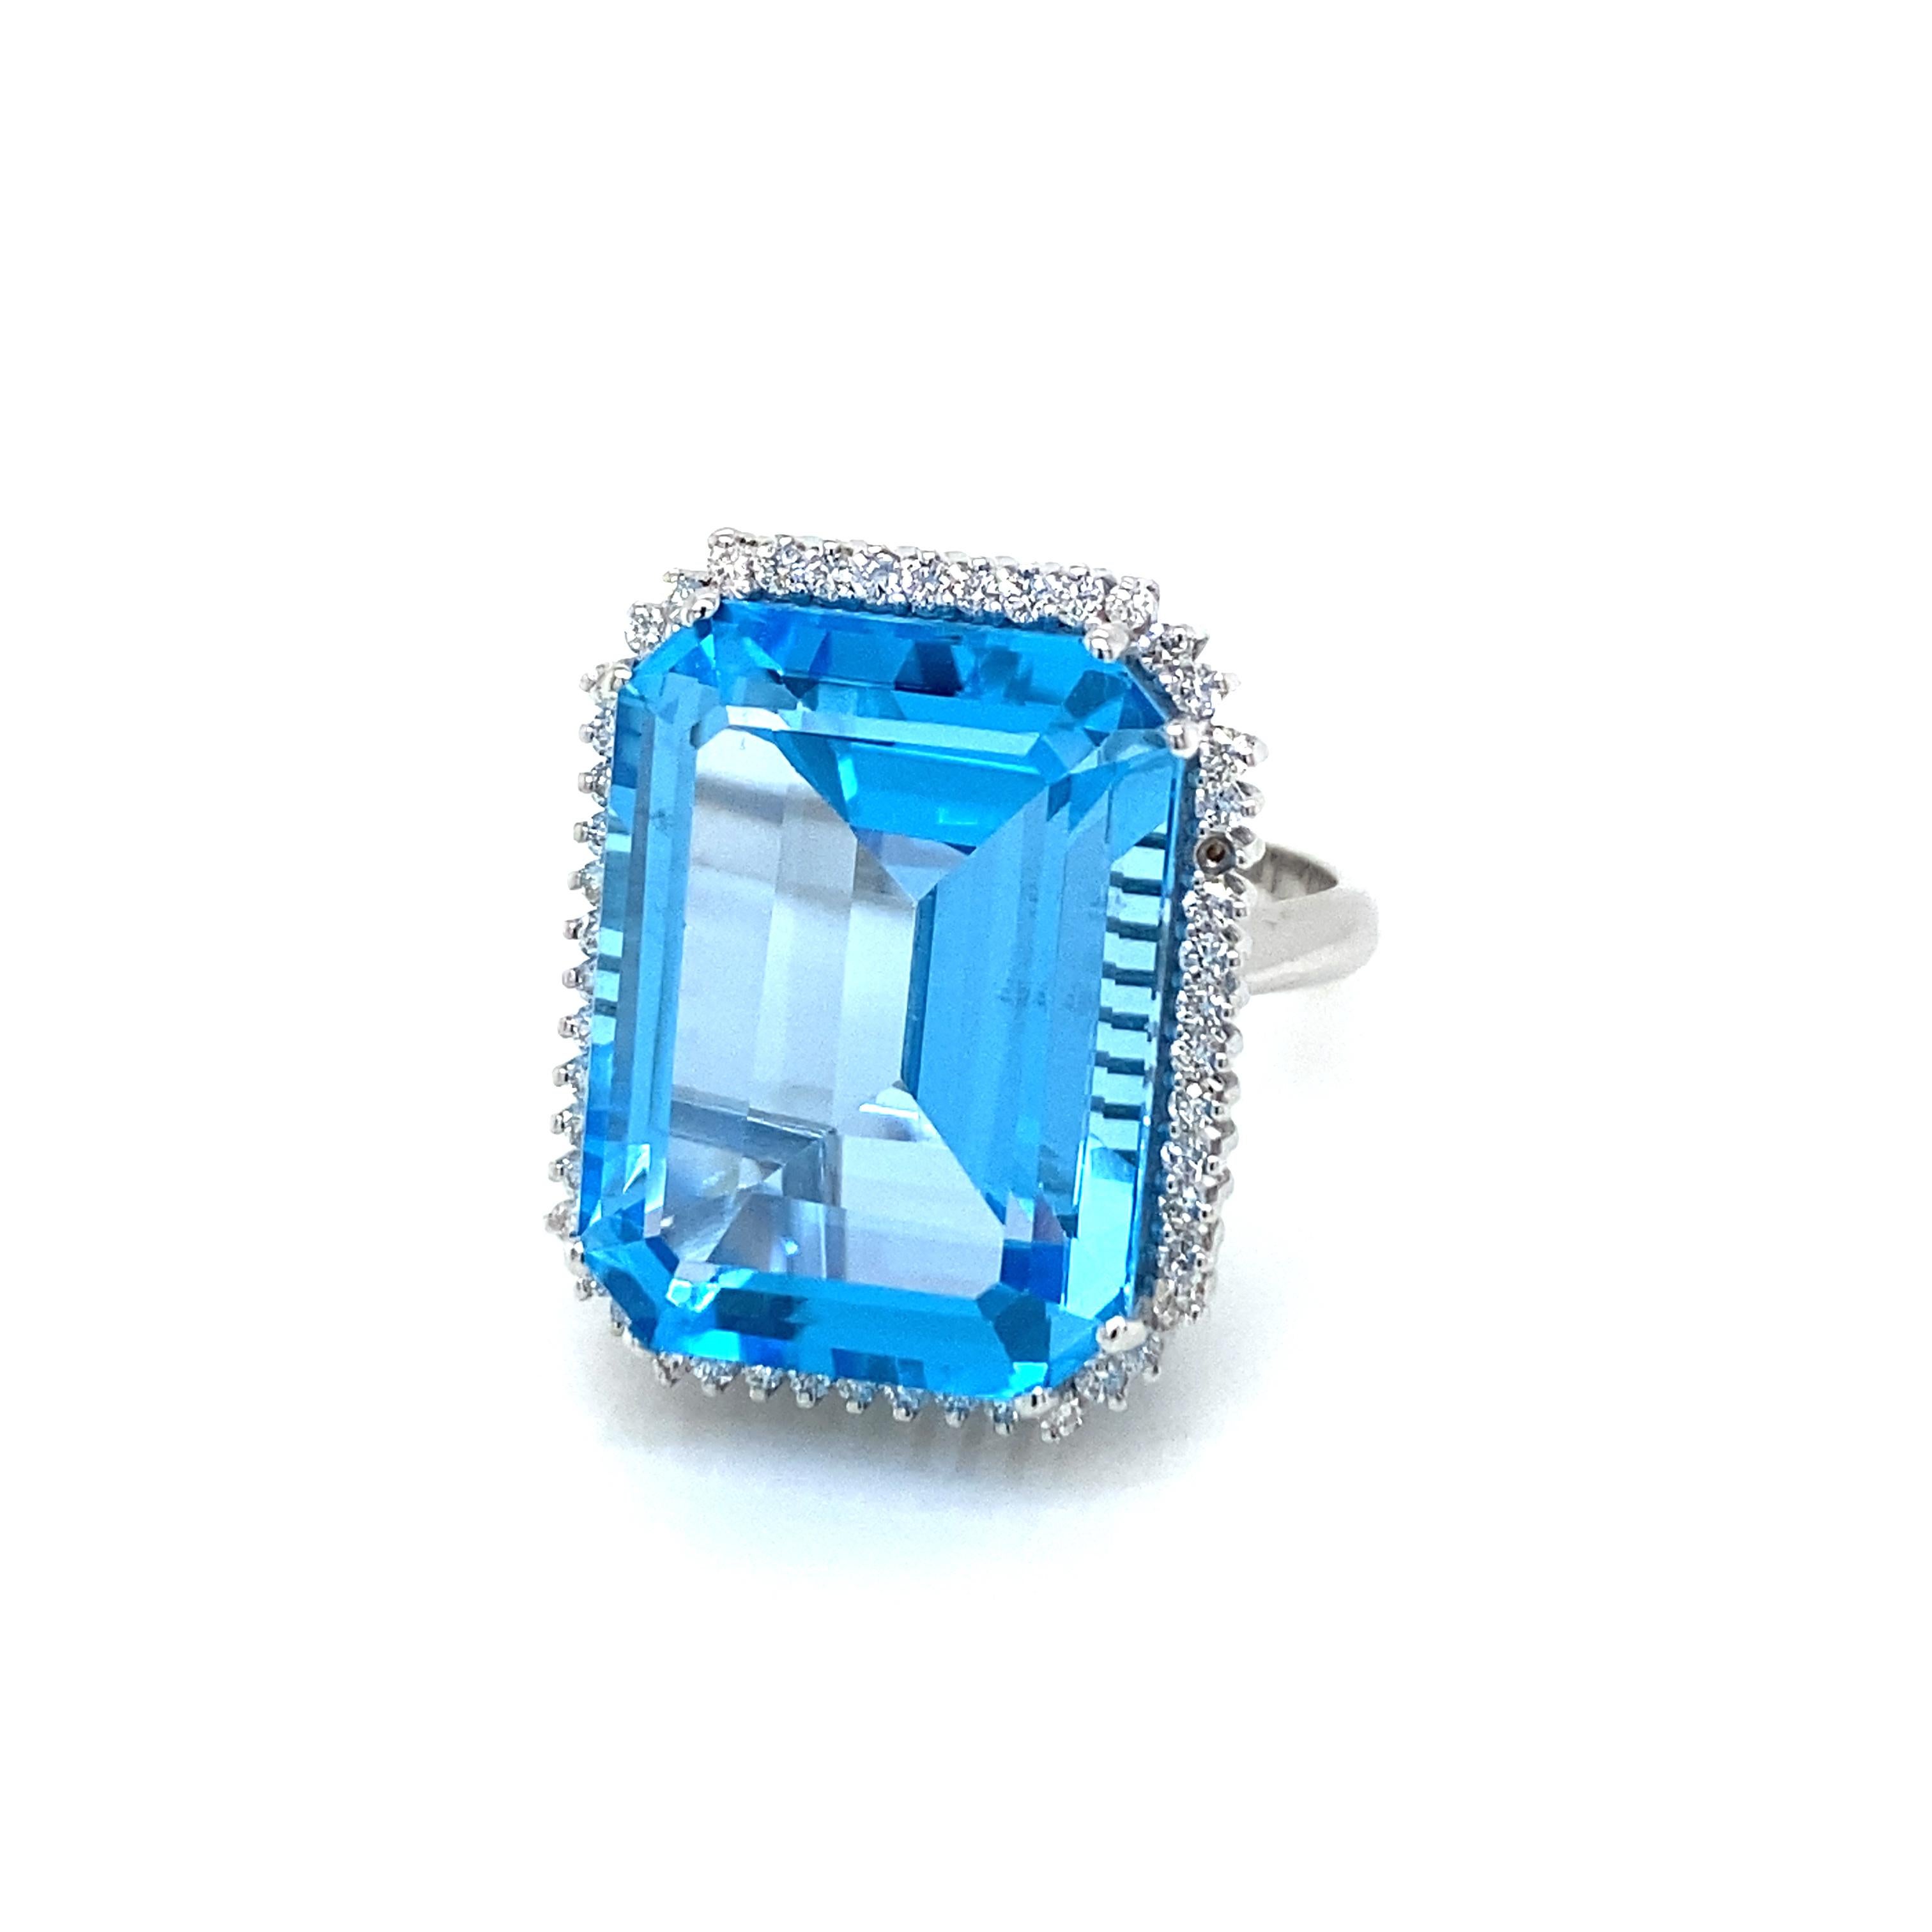 Beautiful and unusual Ring hand crafted in 18k white gold set with a large Natural sparkling Large Topaz of 28,35 carat, it features an amazing vivid color with excellent clarity, and surrounded by approx. 0,50 carat of Colorless round brilliant cut